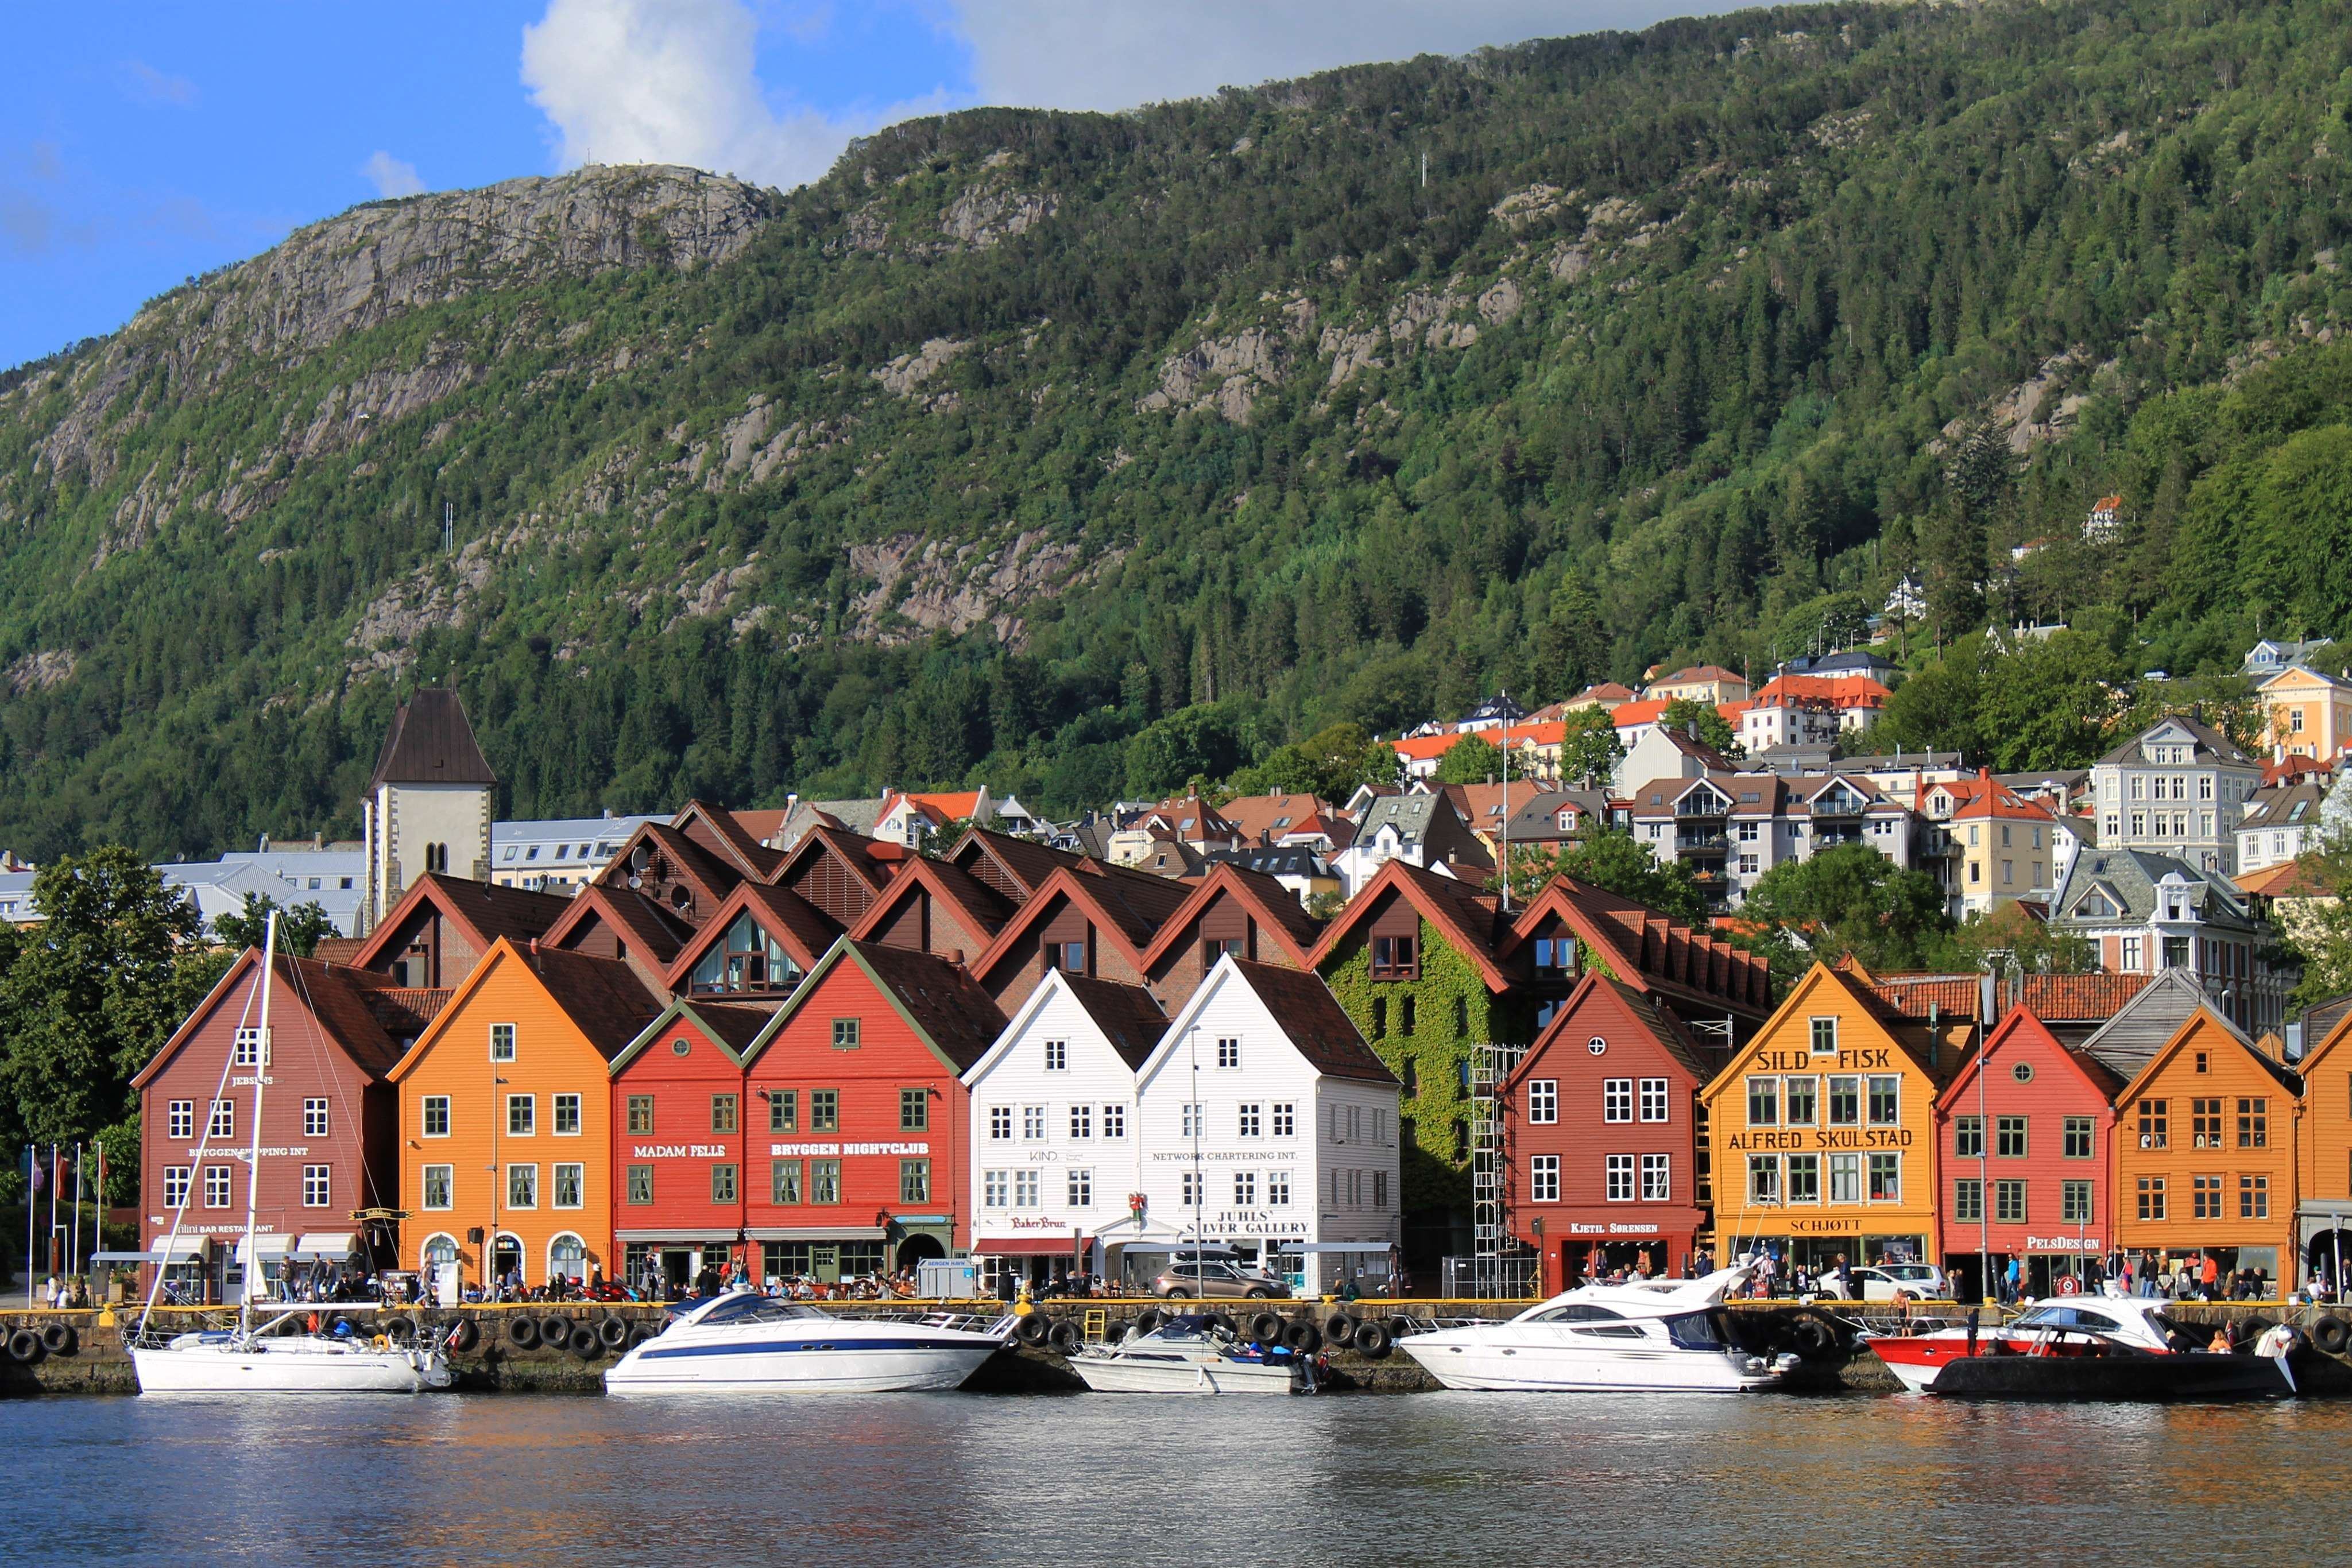 Bergen, is renowned for its Bryggen harbour district